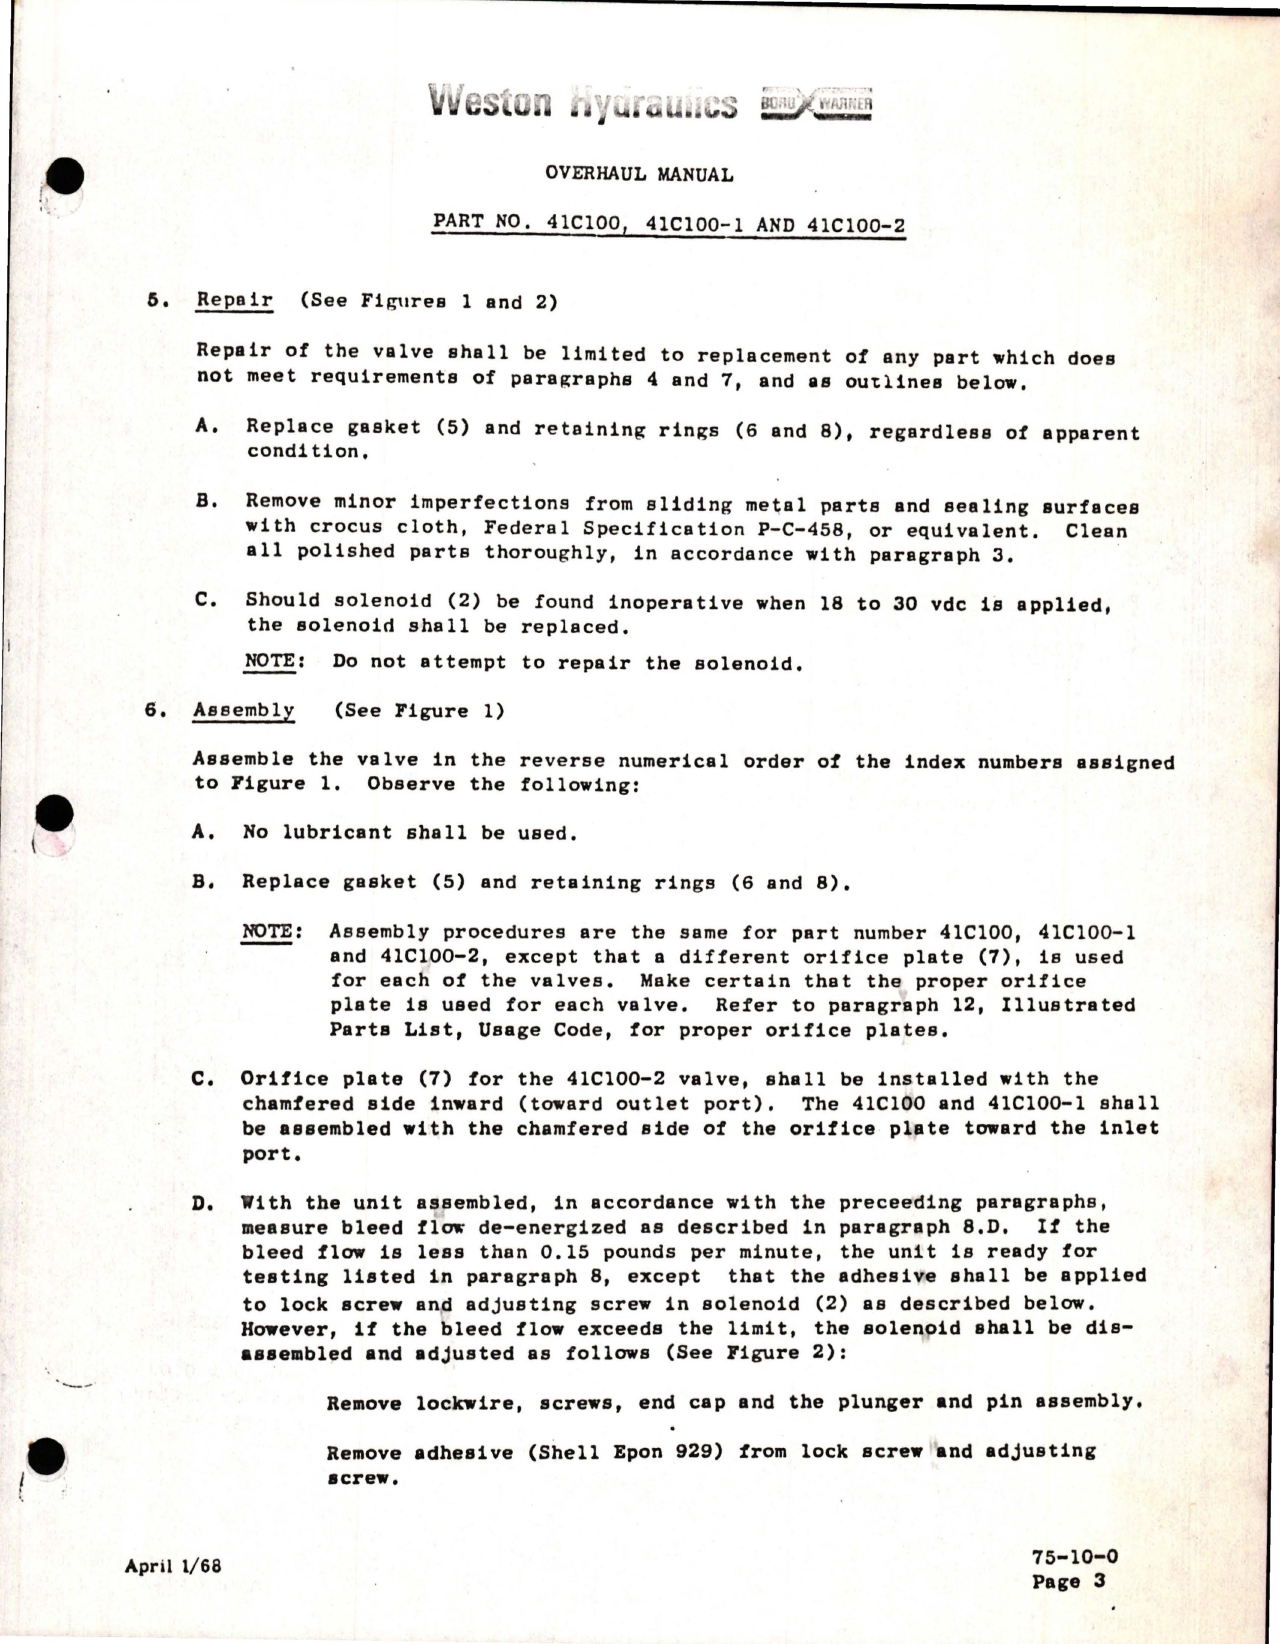 Sample page 5 from AirCorps Library document: Handbook with Parts List for Solenoid Operated Air Shut Off Valve - Parts 41C100, 41C100-1, 41C100-2